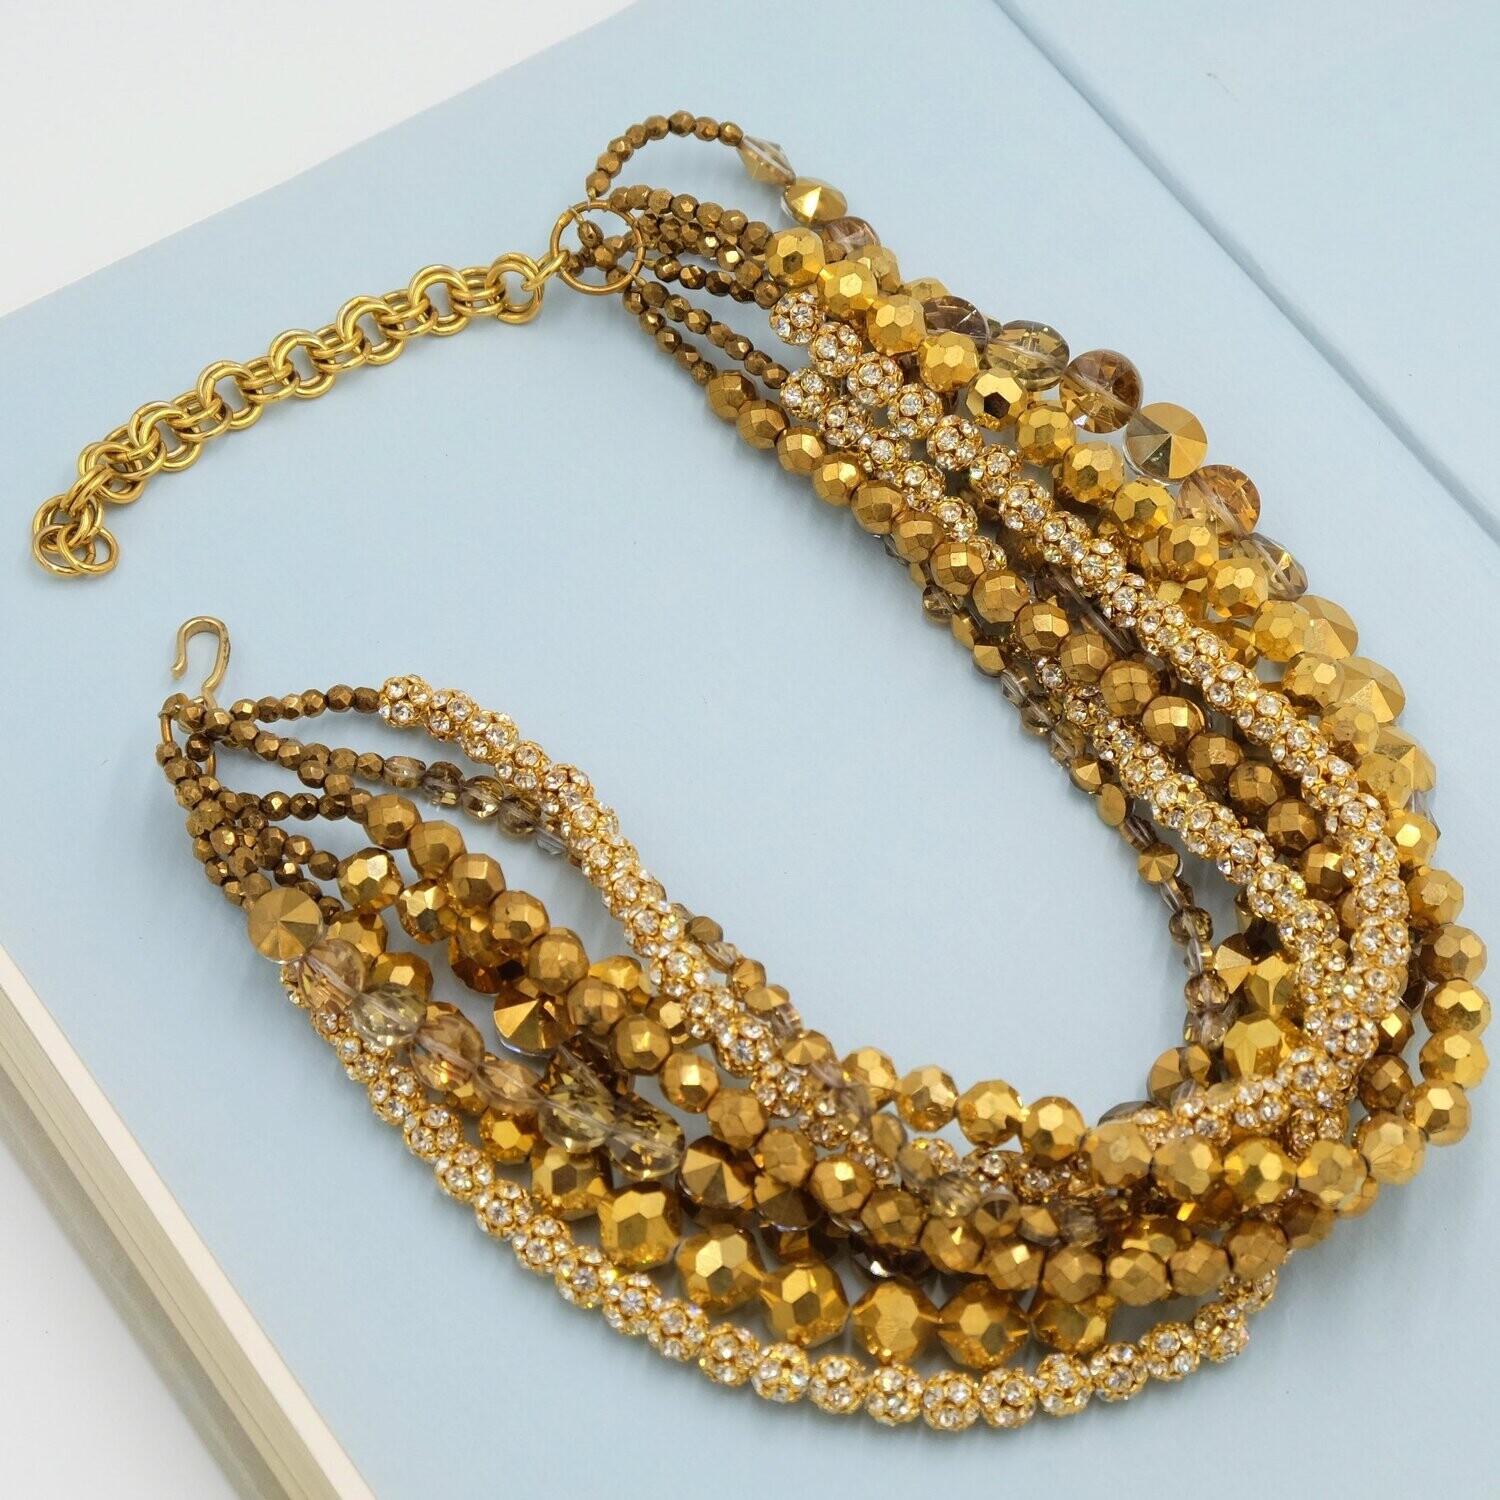 Multirow Gold Beads Midcentury Necklace Unsigned